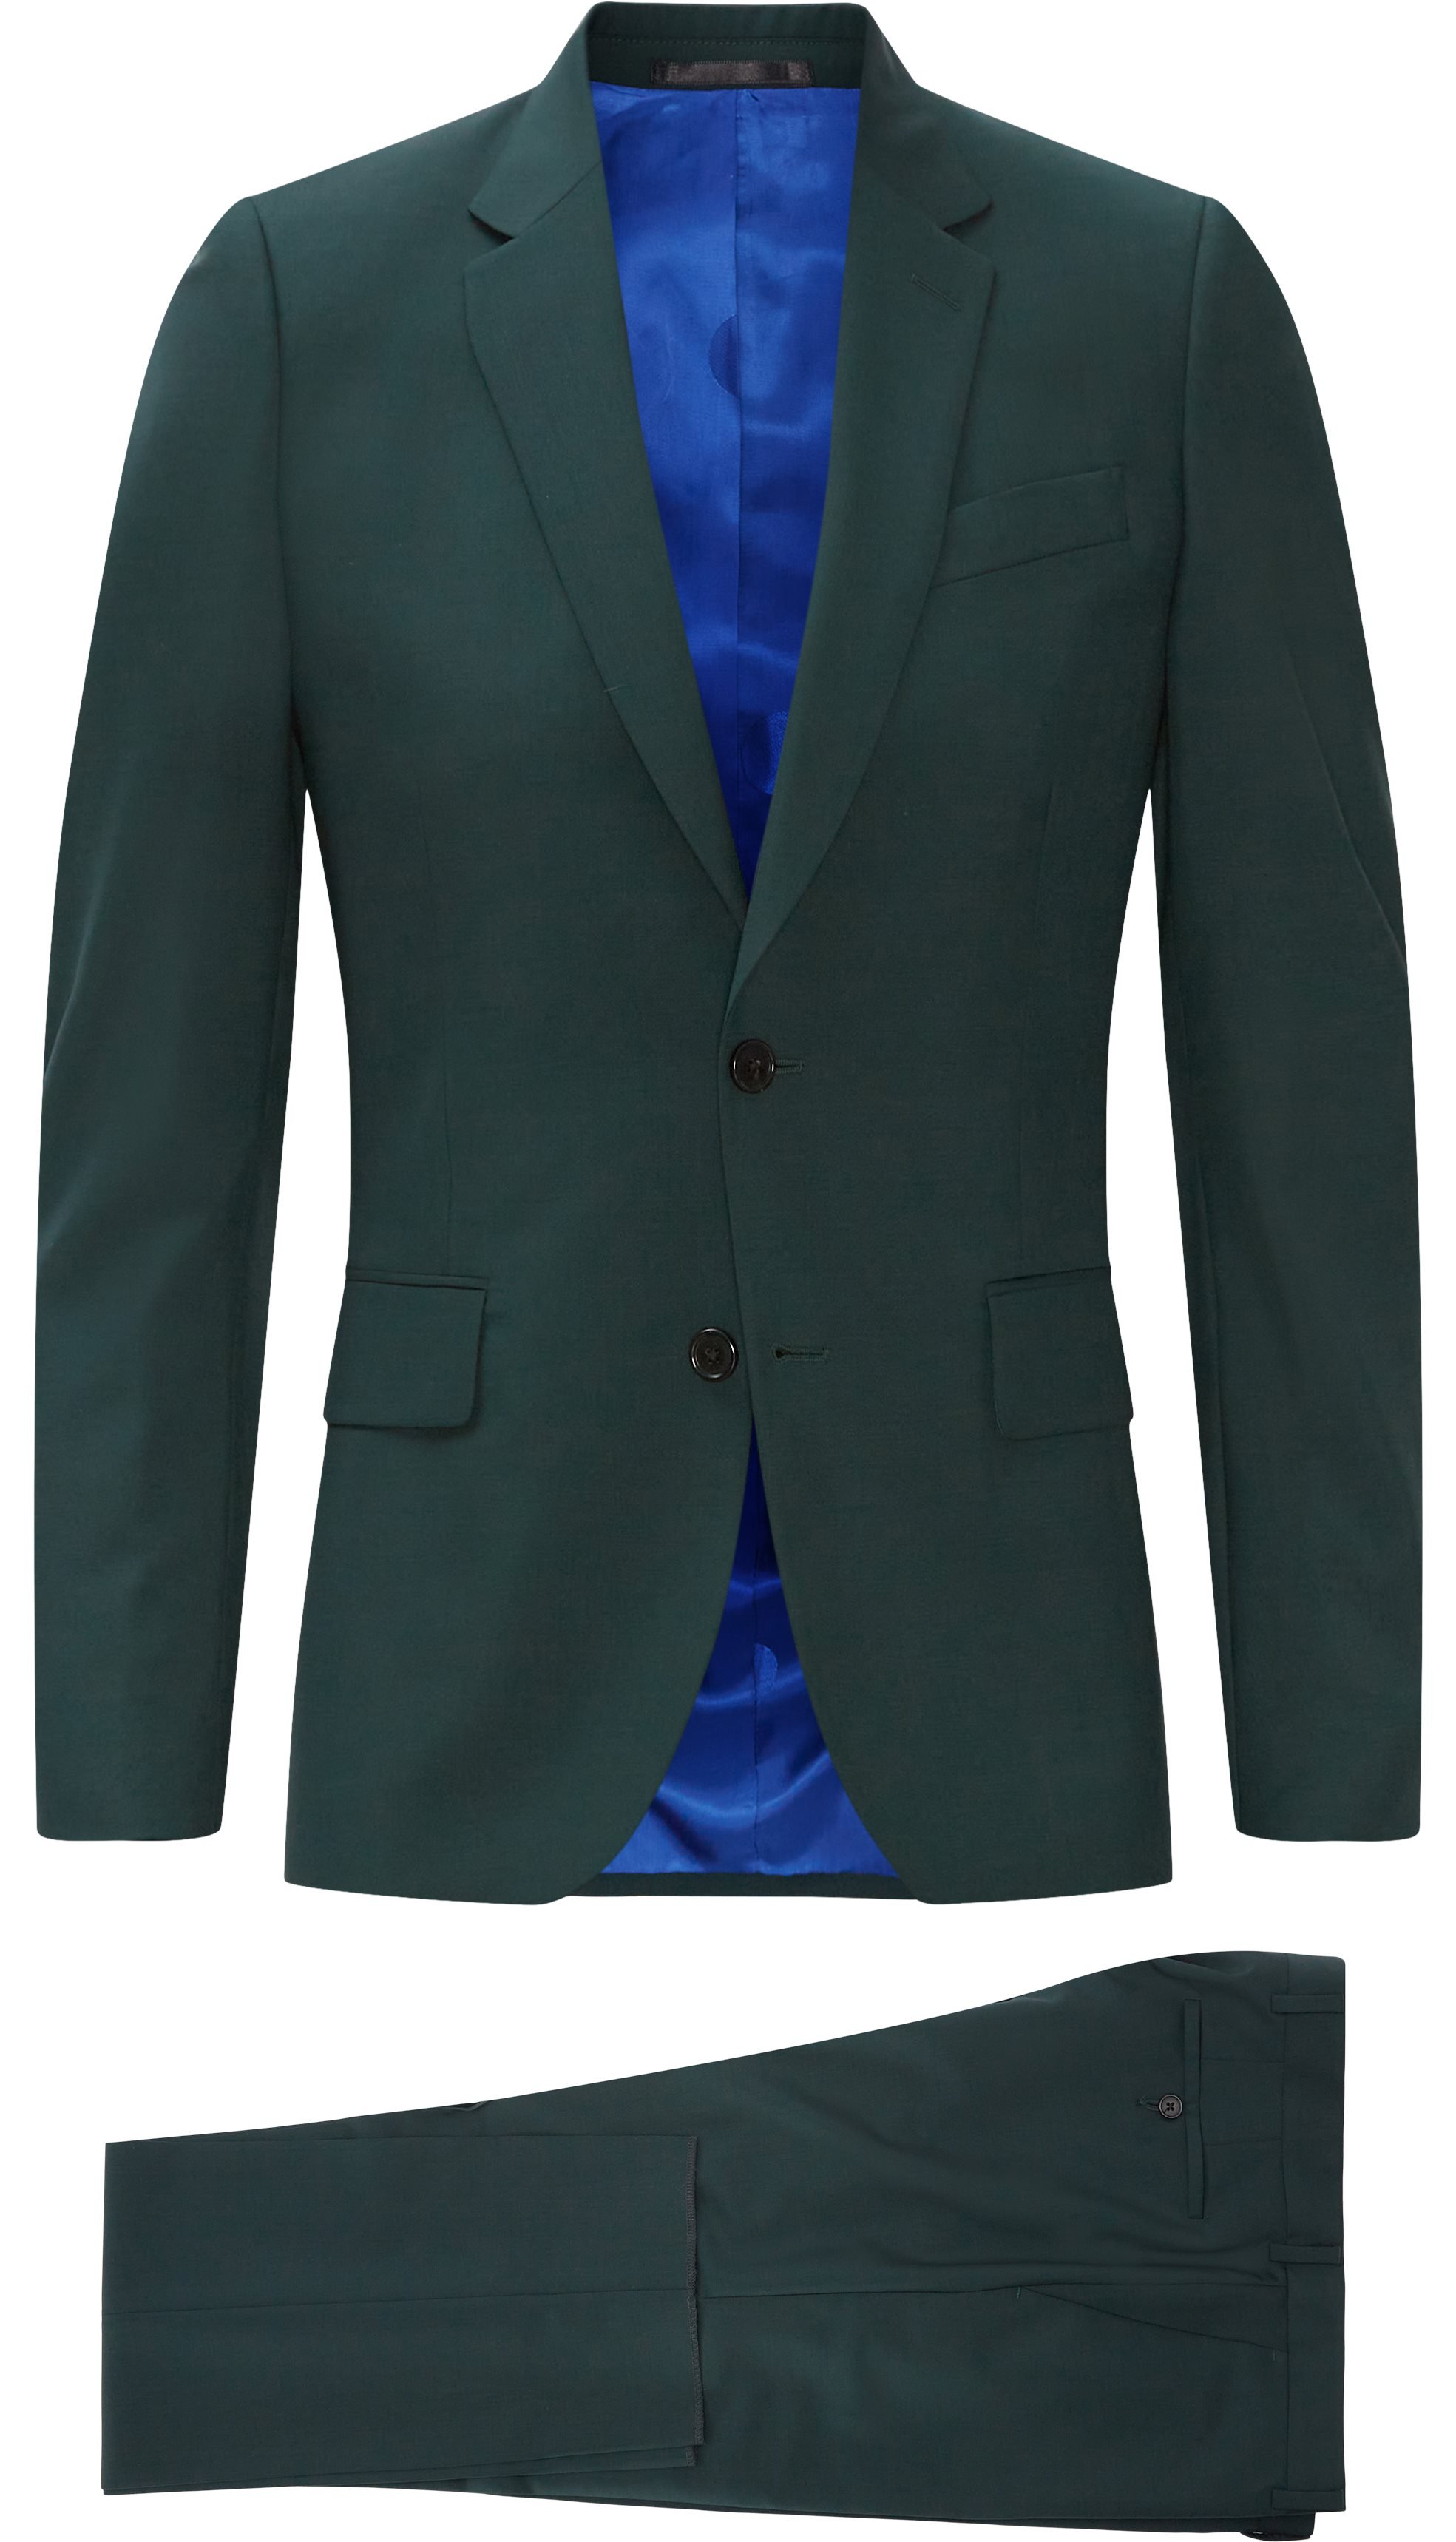 Suits - Slim fit - Green